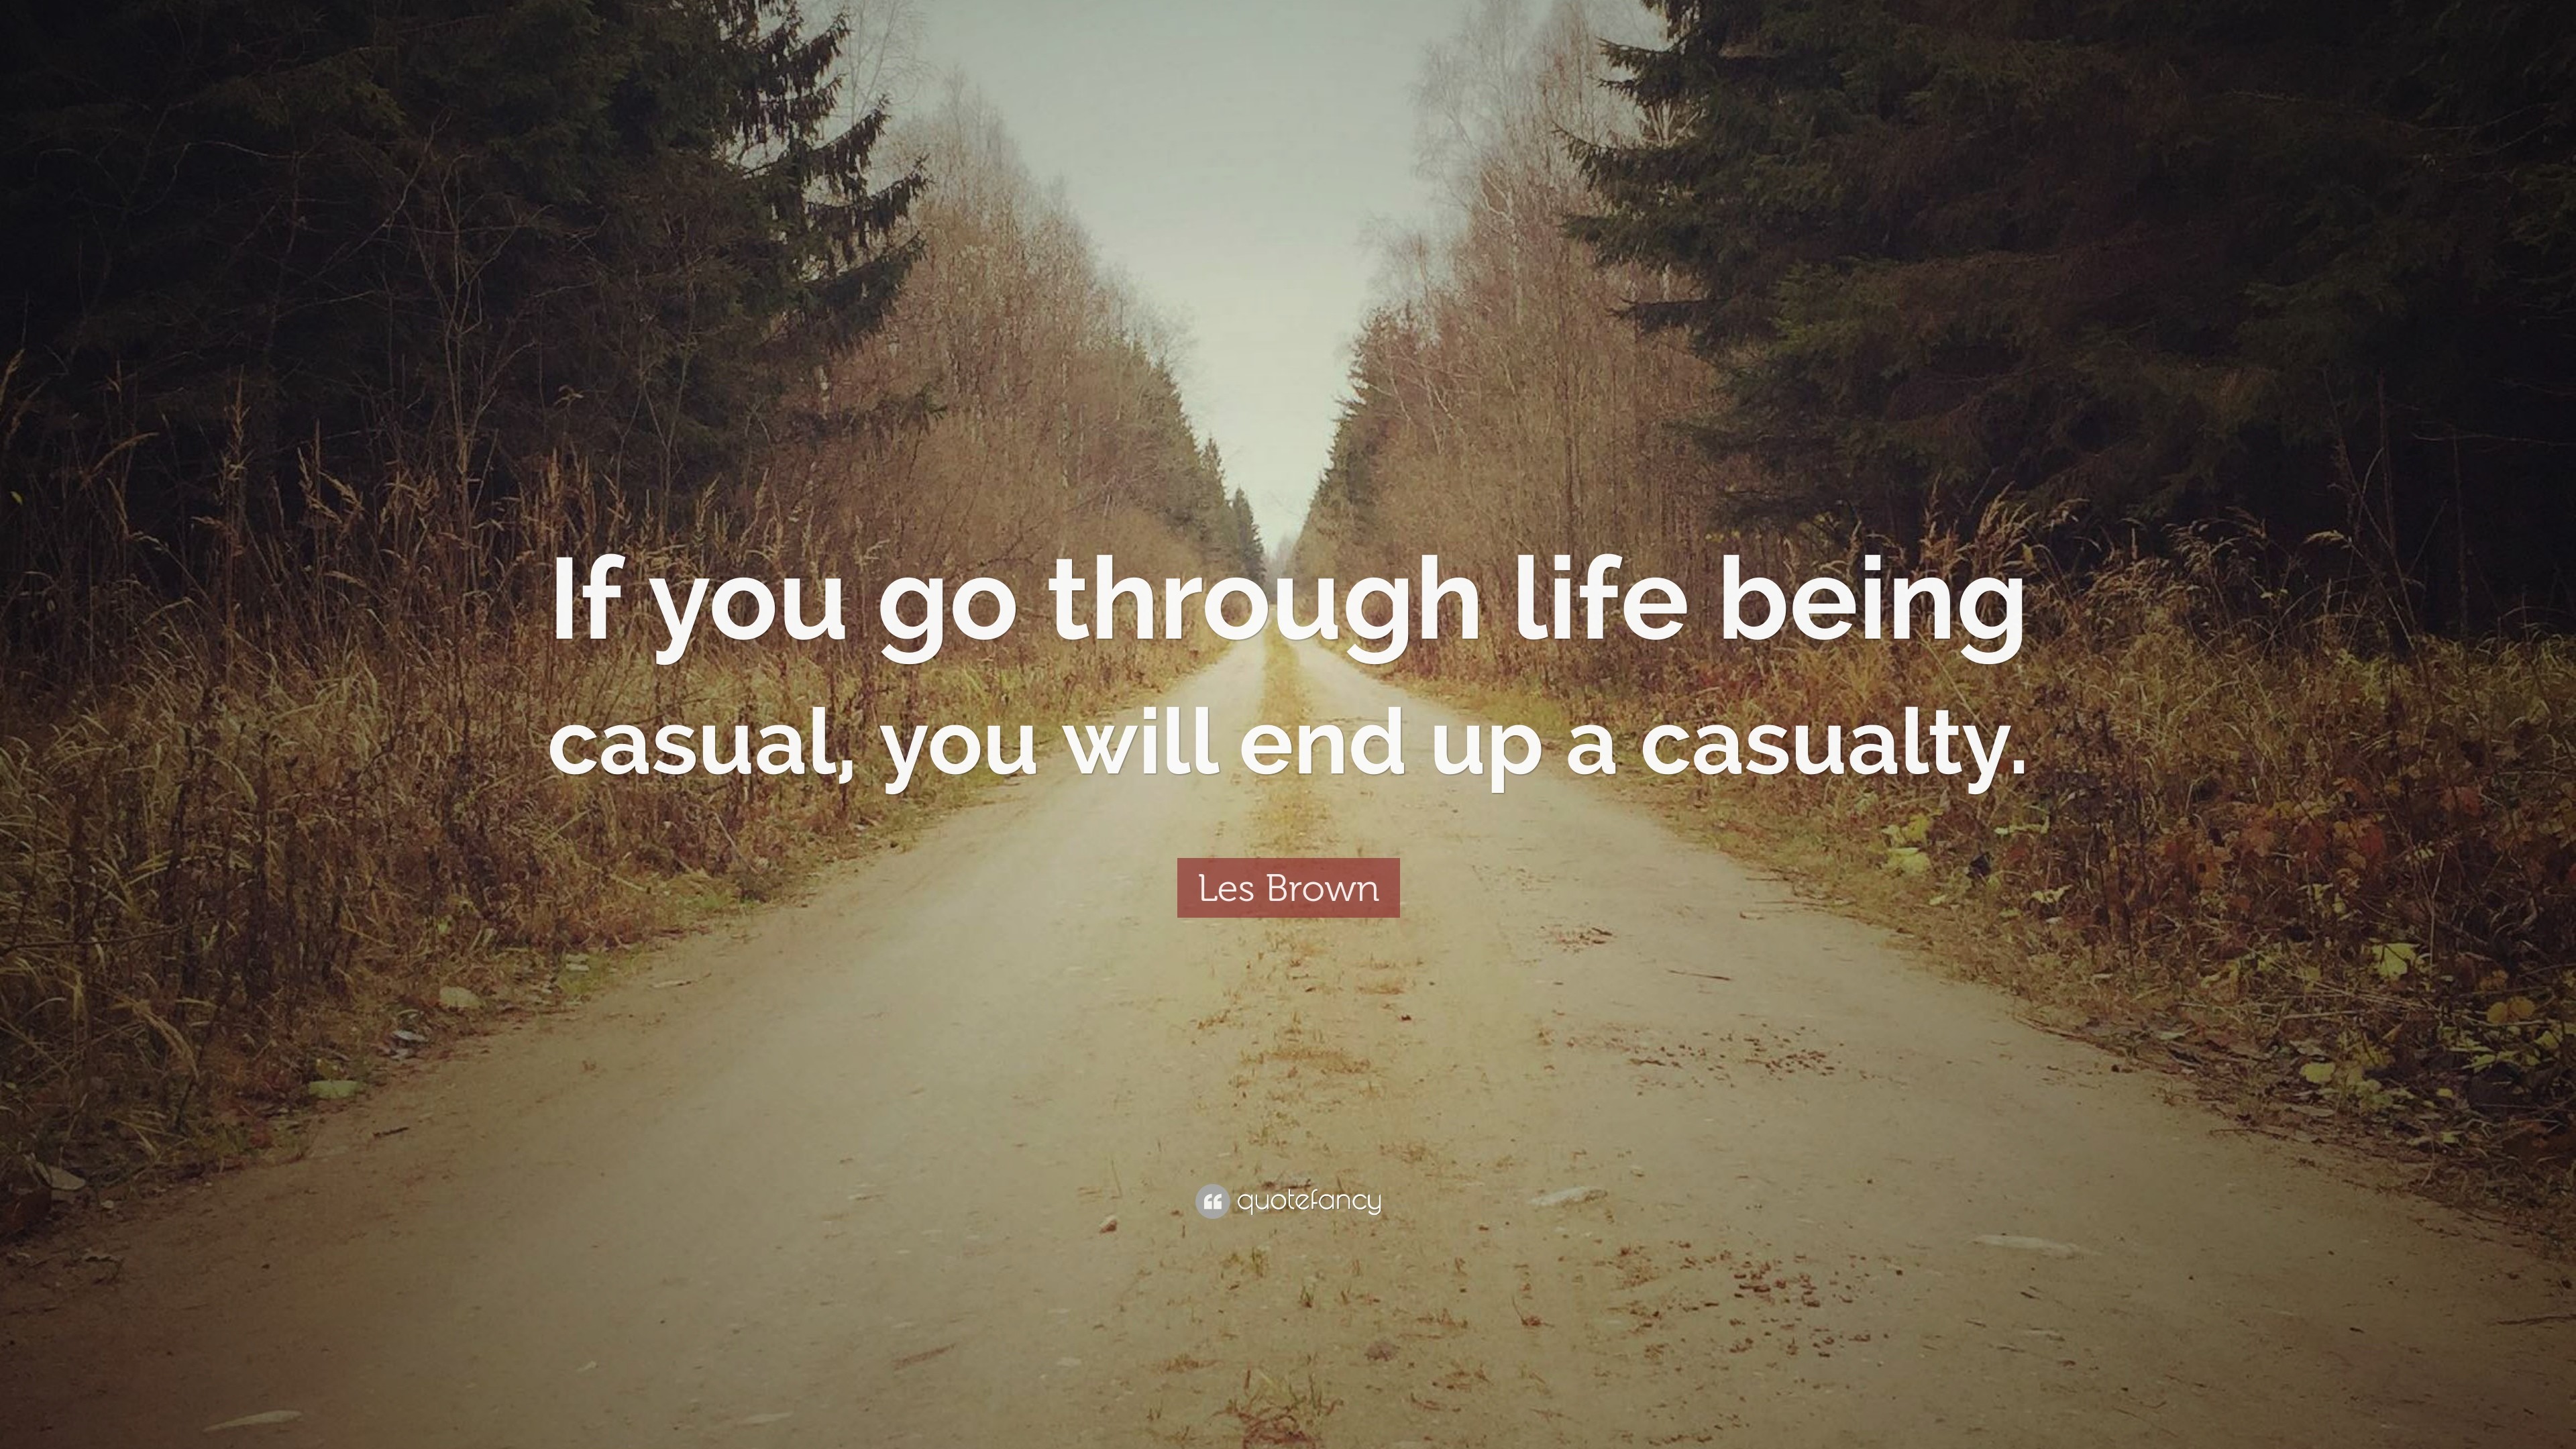 3840x2160 Les Brown Quote: “If you go through life being casual, you will end